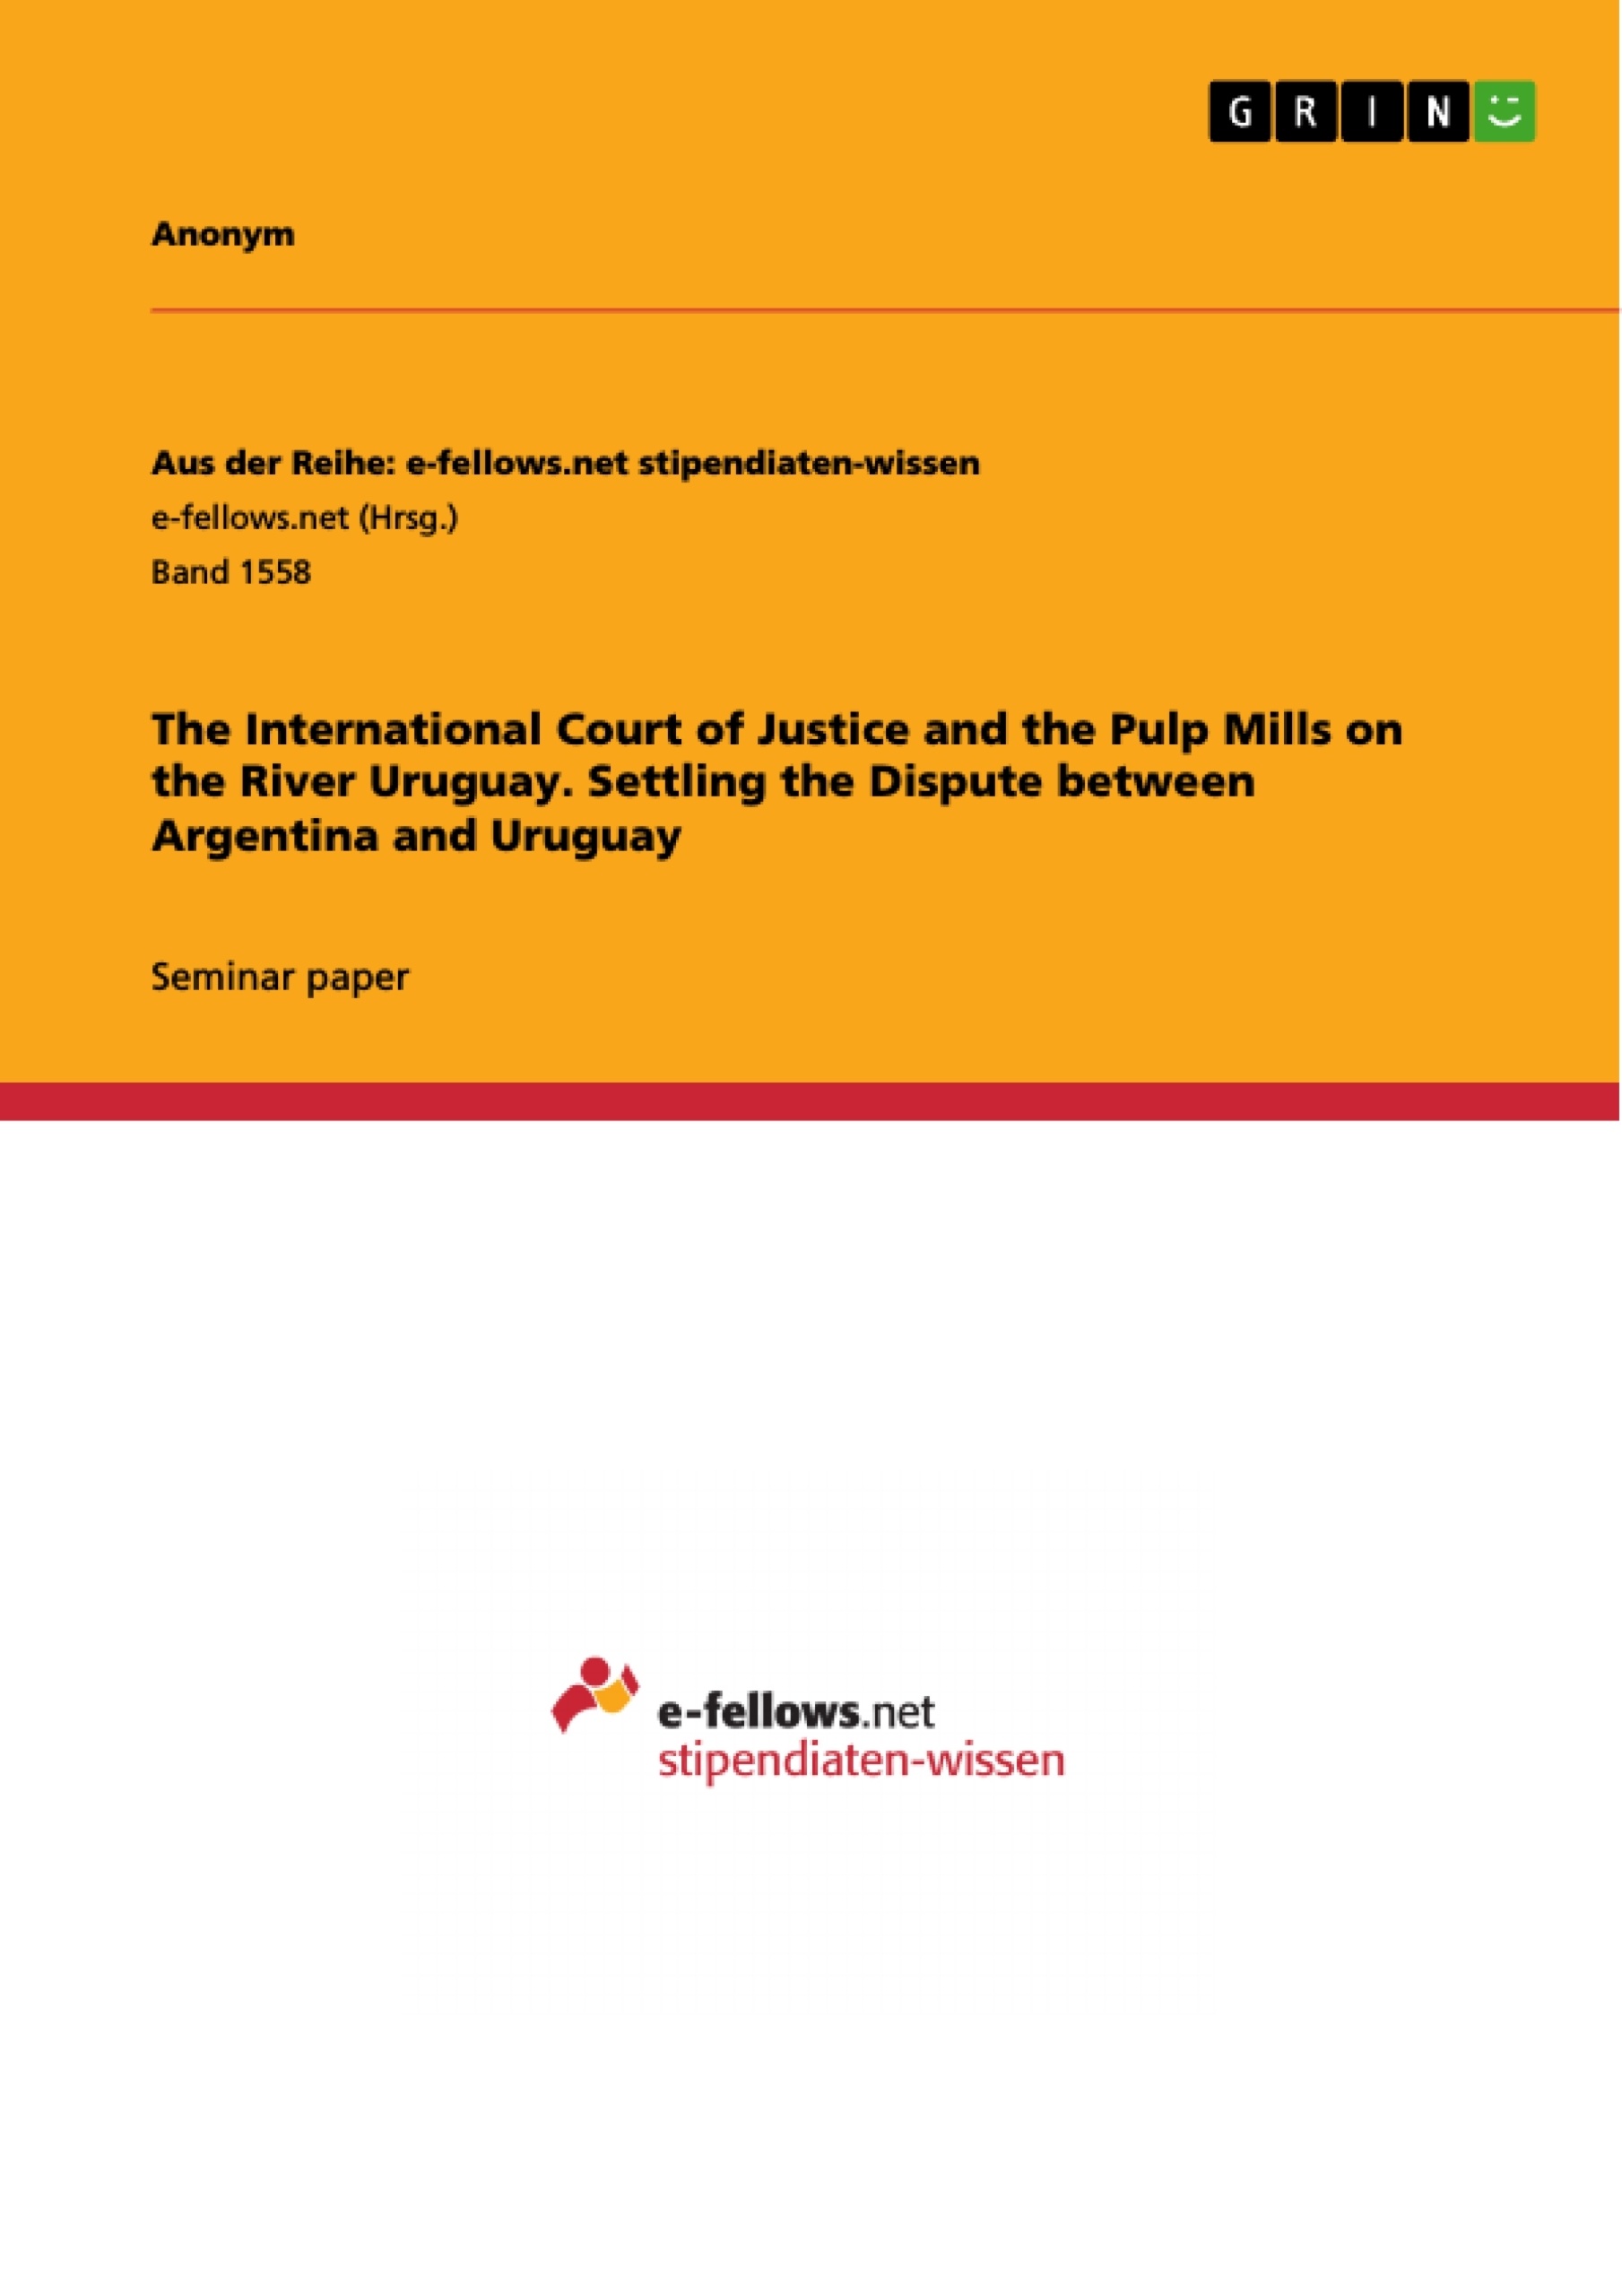 Titre: The International Court of Justice and the Pulp Mills on the River Uruguay. Settling the Dispute between Argentina and Uruguay